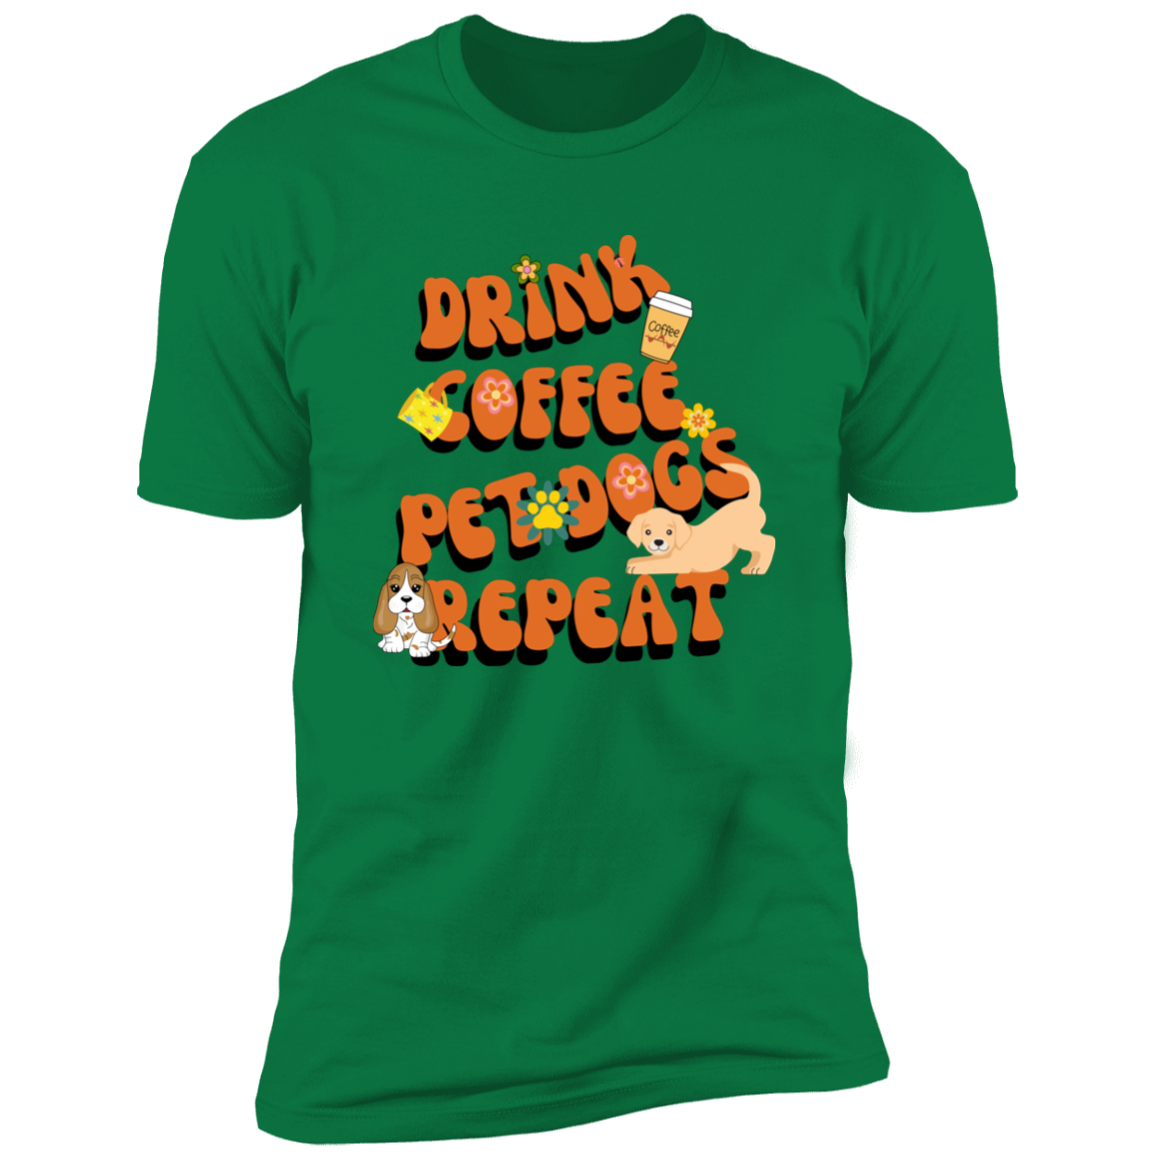 Drink Coffee Pet dogs repeat dog  Shirt, funny dog shirt for humans, dog mom and dog dad shirt, in kelly green